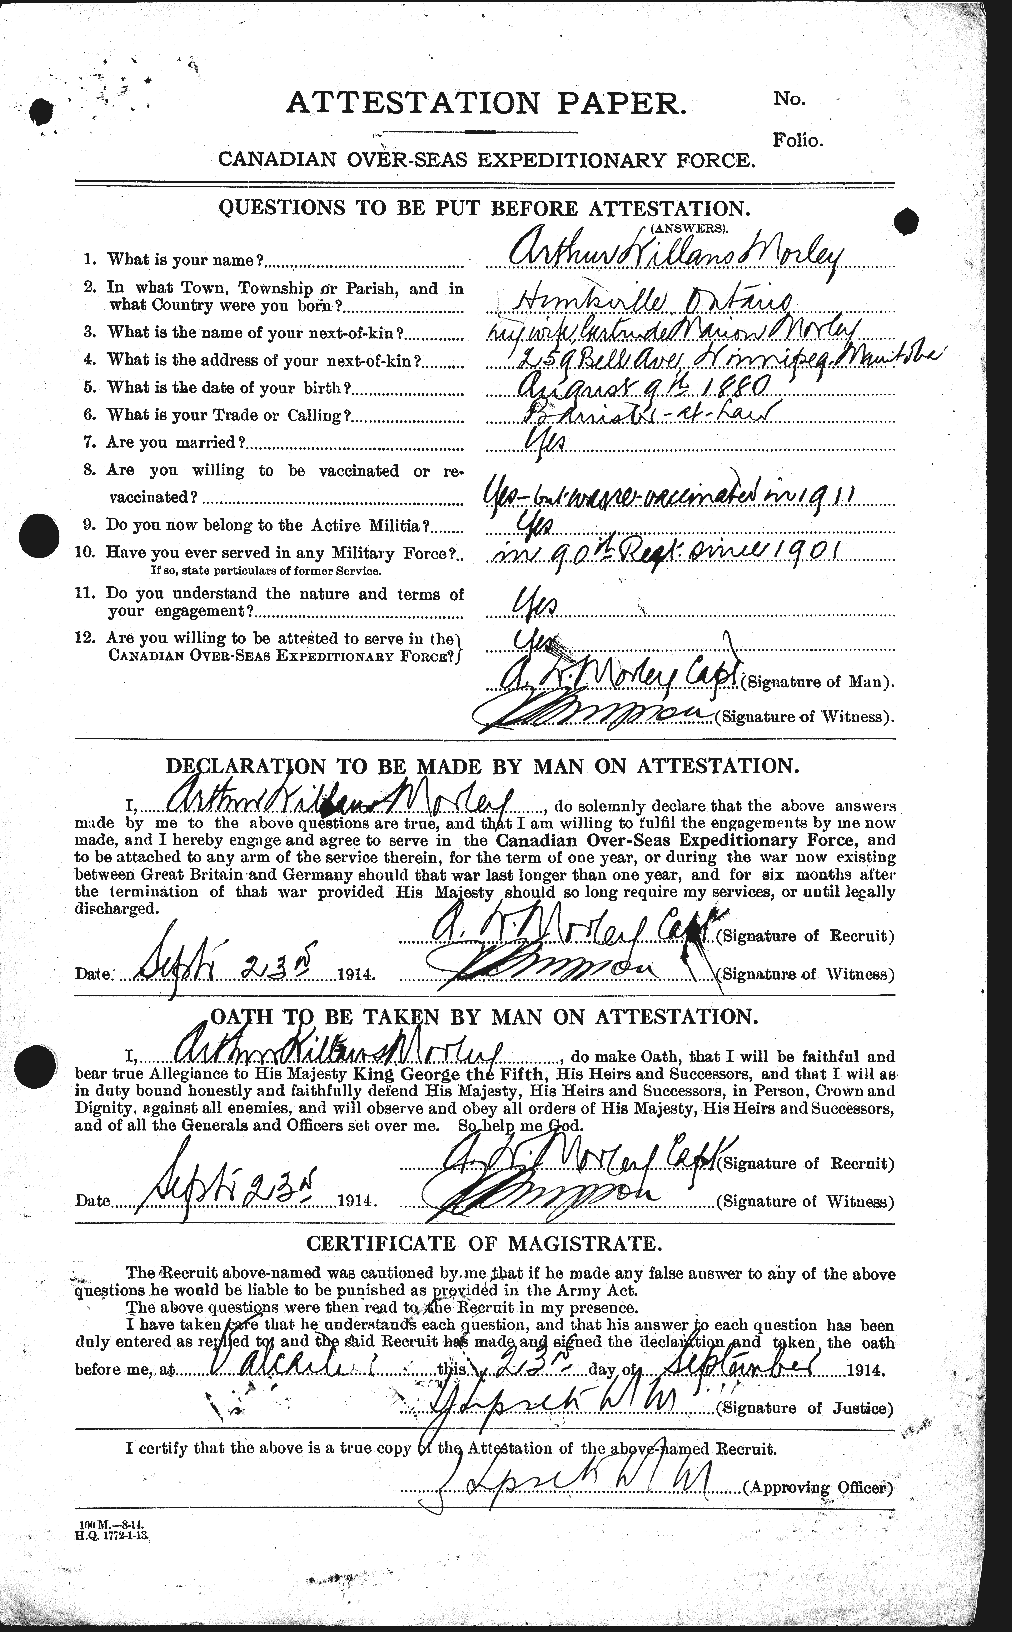 Personnel Records of the First World War - CEF 508030a